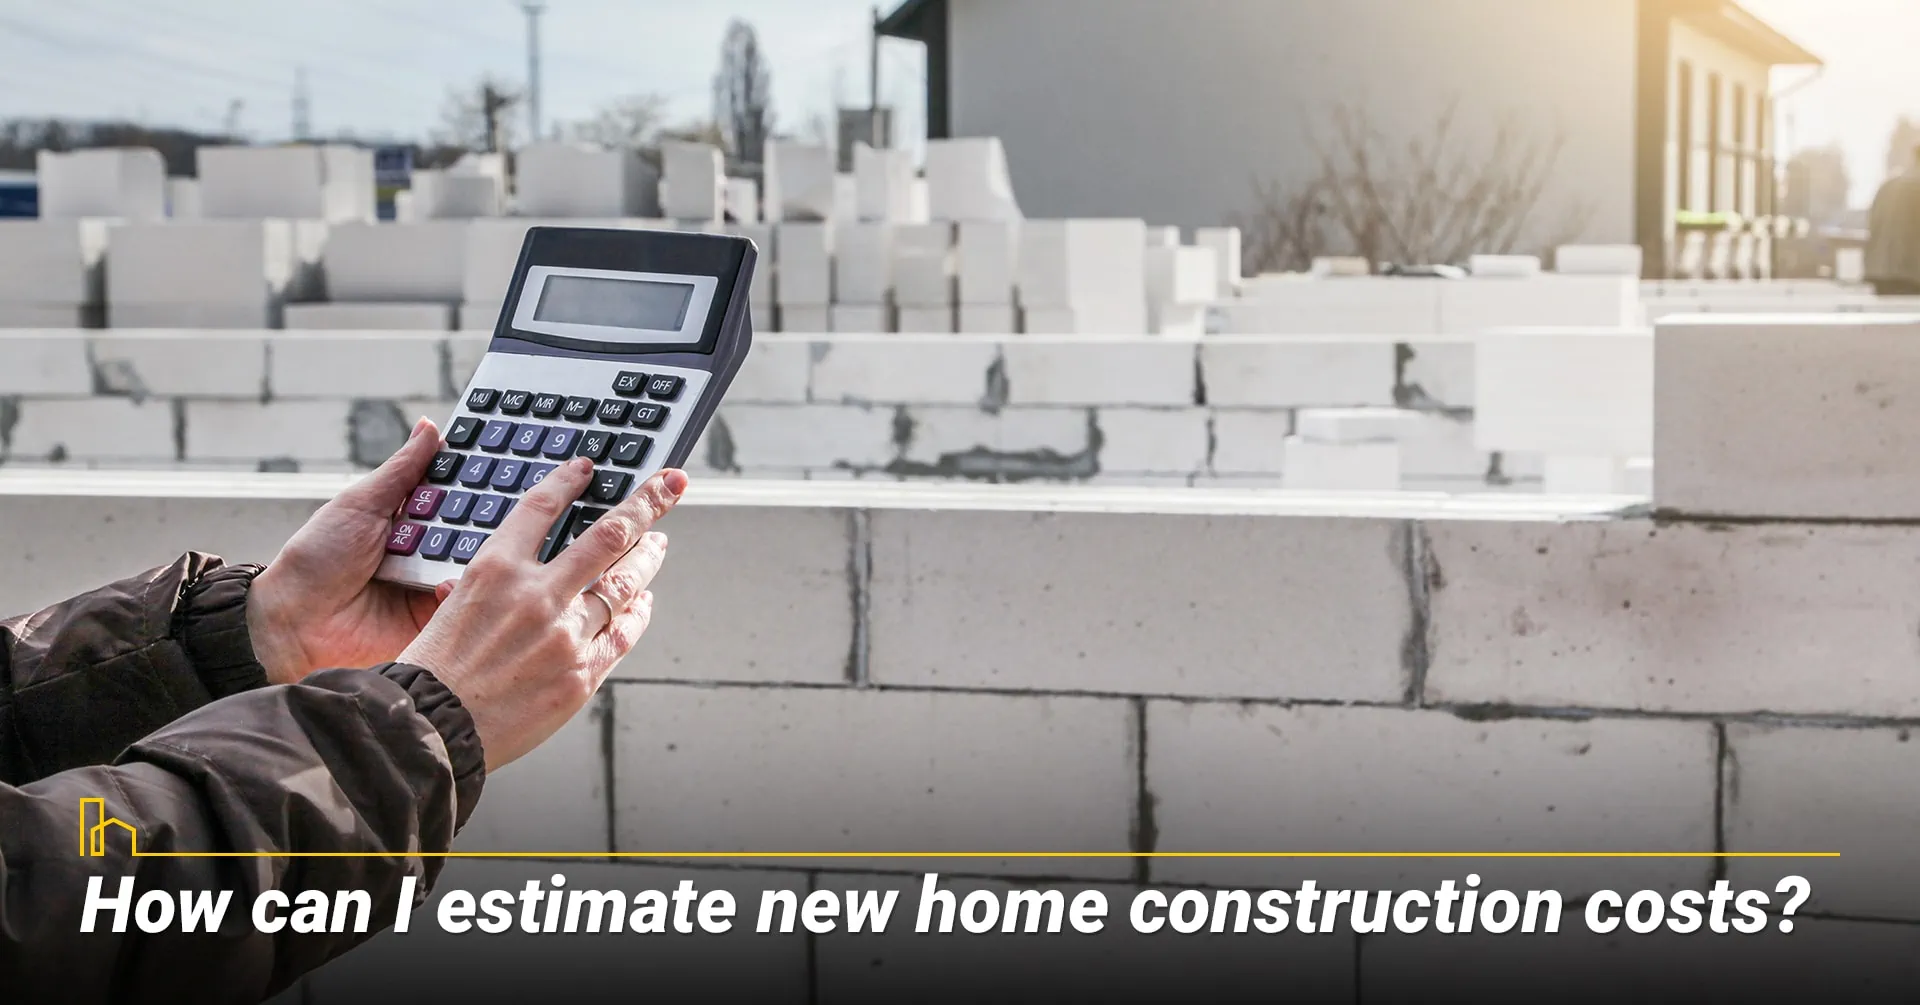 How can I estimate new home construction costs?